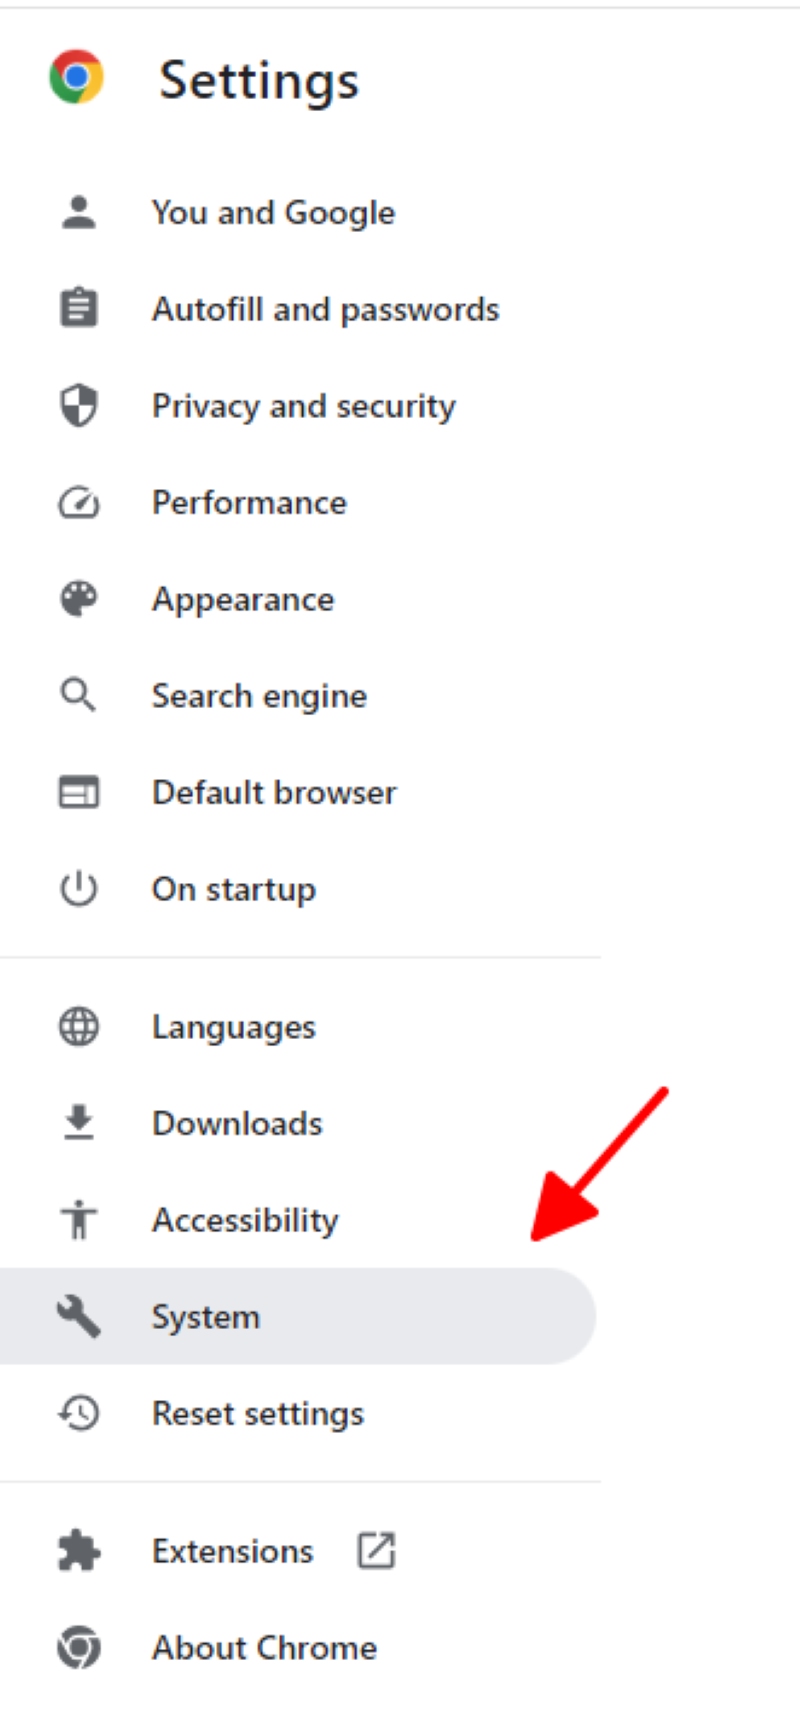 select the System setting of the Chrome browser